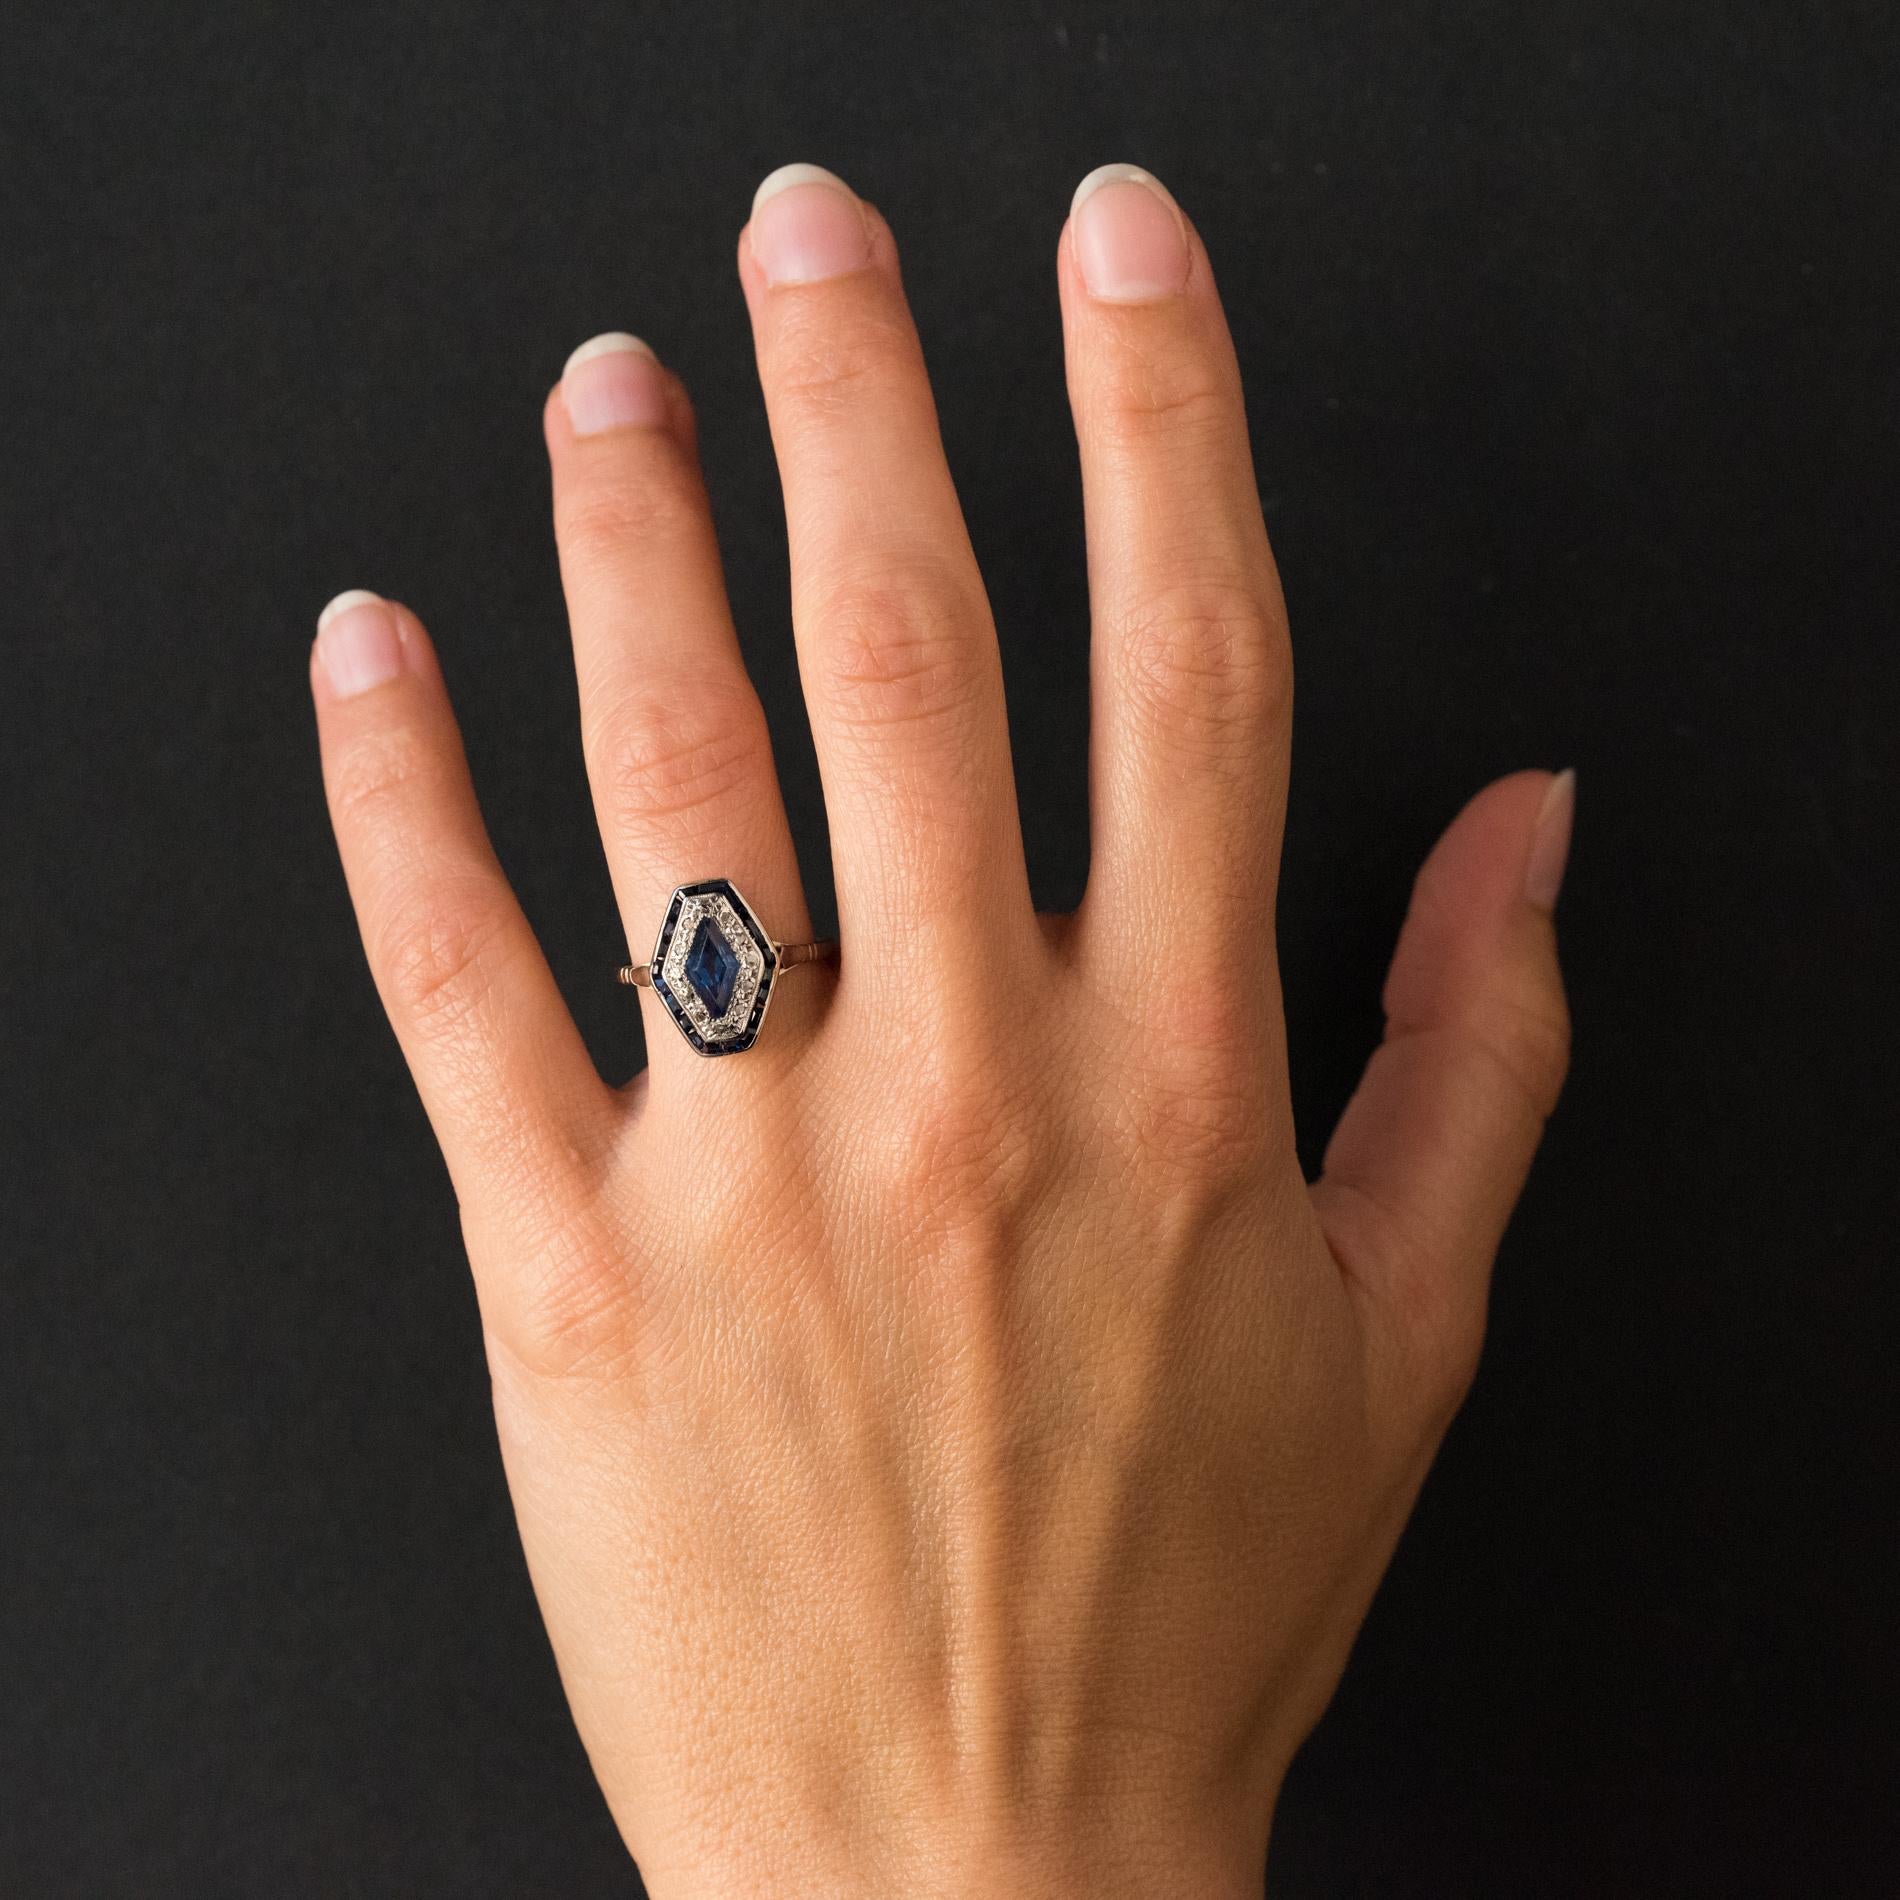 Ring in platinum and 18 karats white gold, eagle's head hallmark.
This charming art deco ring with hexagonal lines is adorned with a blue lozenge sapphire surrounded by rose- cut diamonds. It is bordered on all its circumference by blue gems.
Height